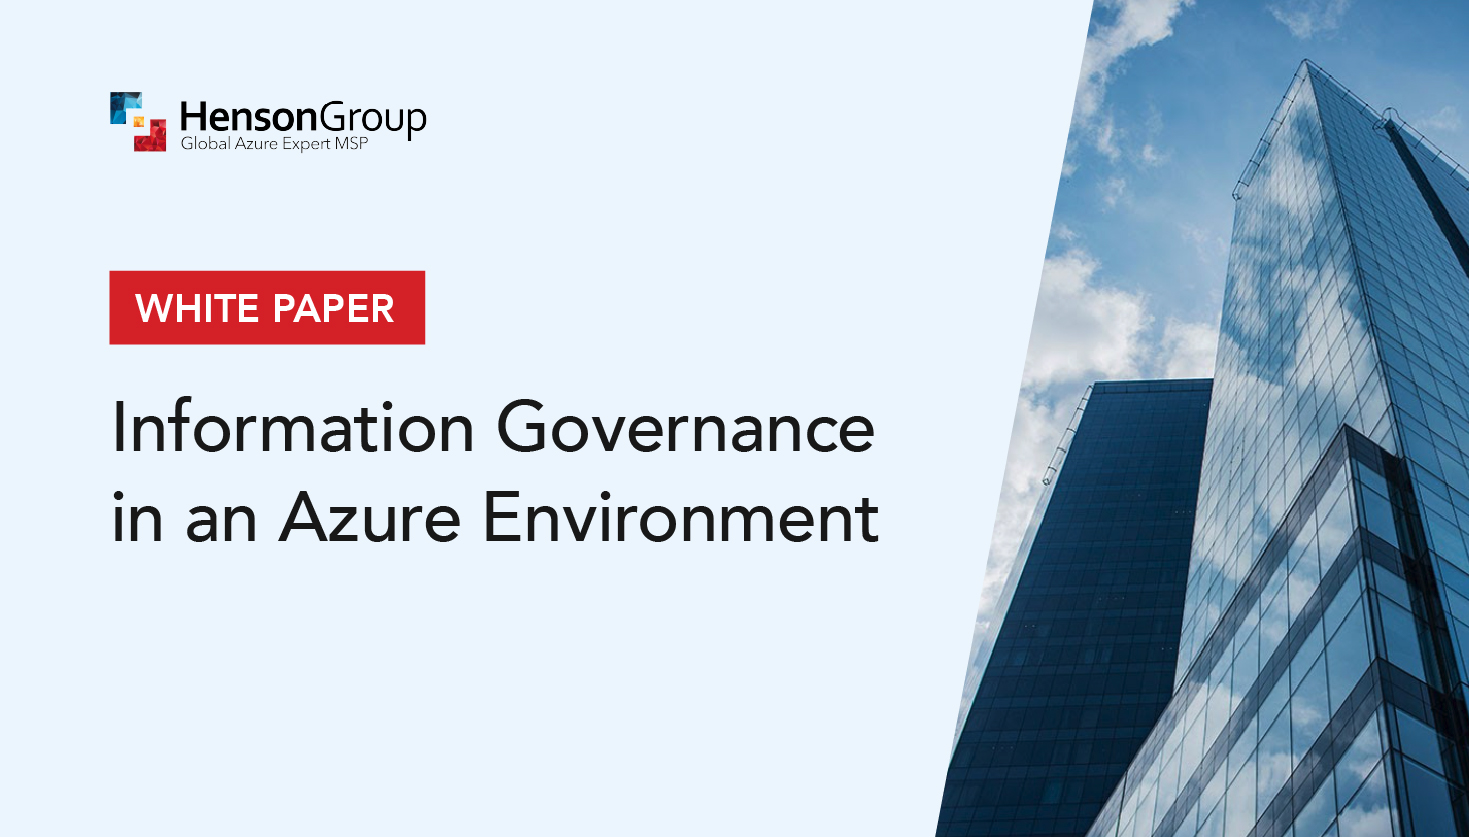 Henson-Group-White-Paper-Information-Governance -in-an-Azure-Environment-IMAGES-Featured